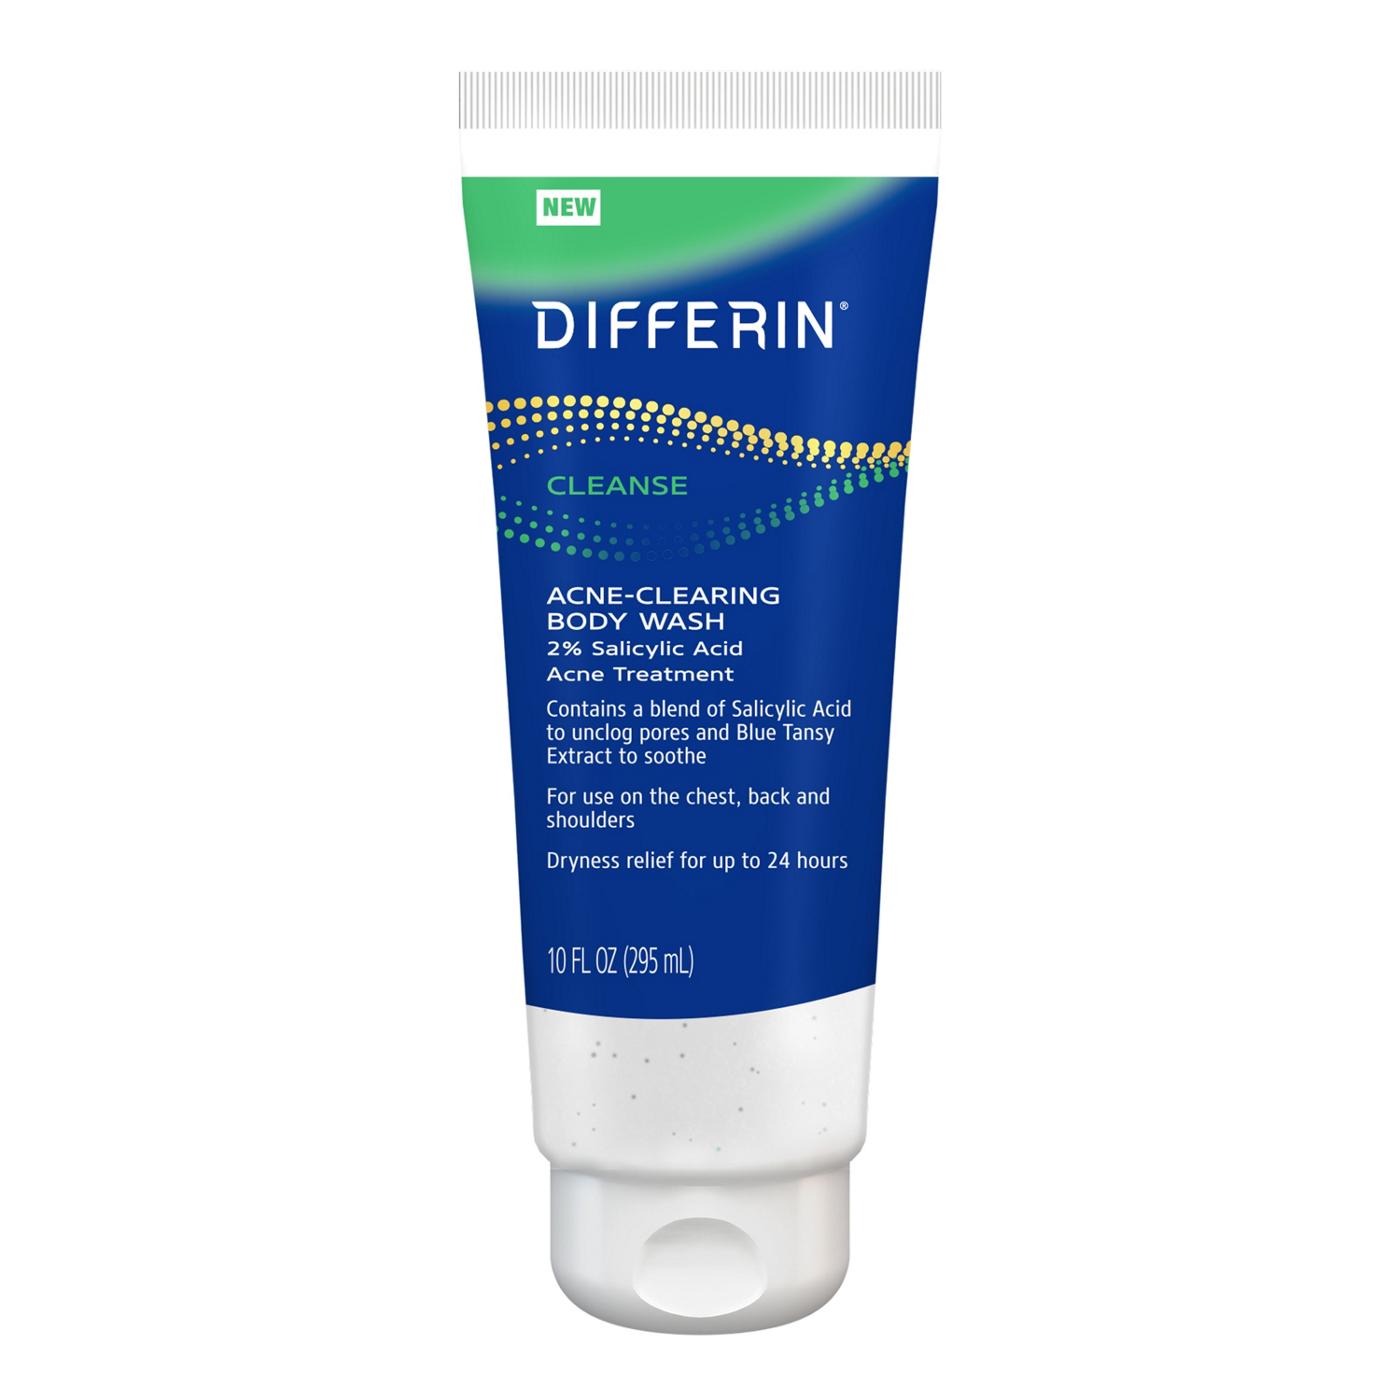 Differin Differin Acne-Clearing Relief Body Wash; image 1 of 2